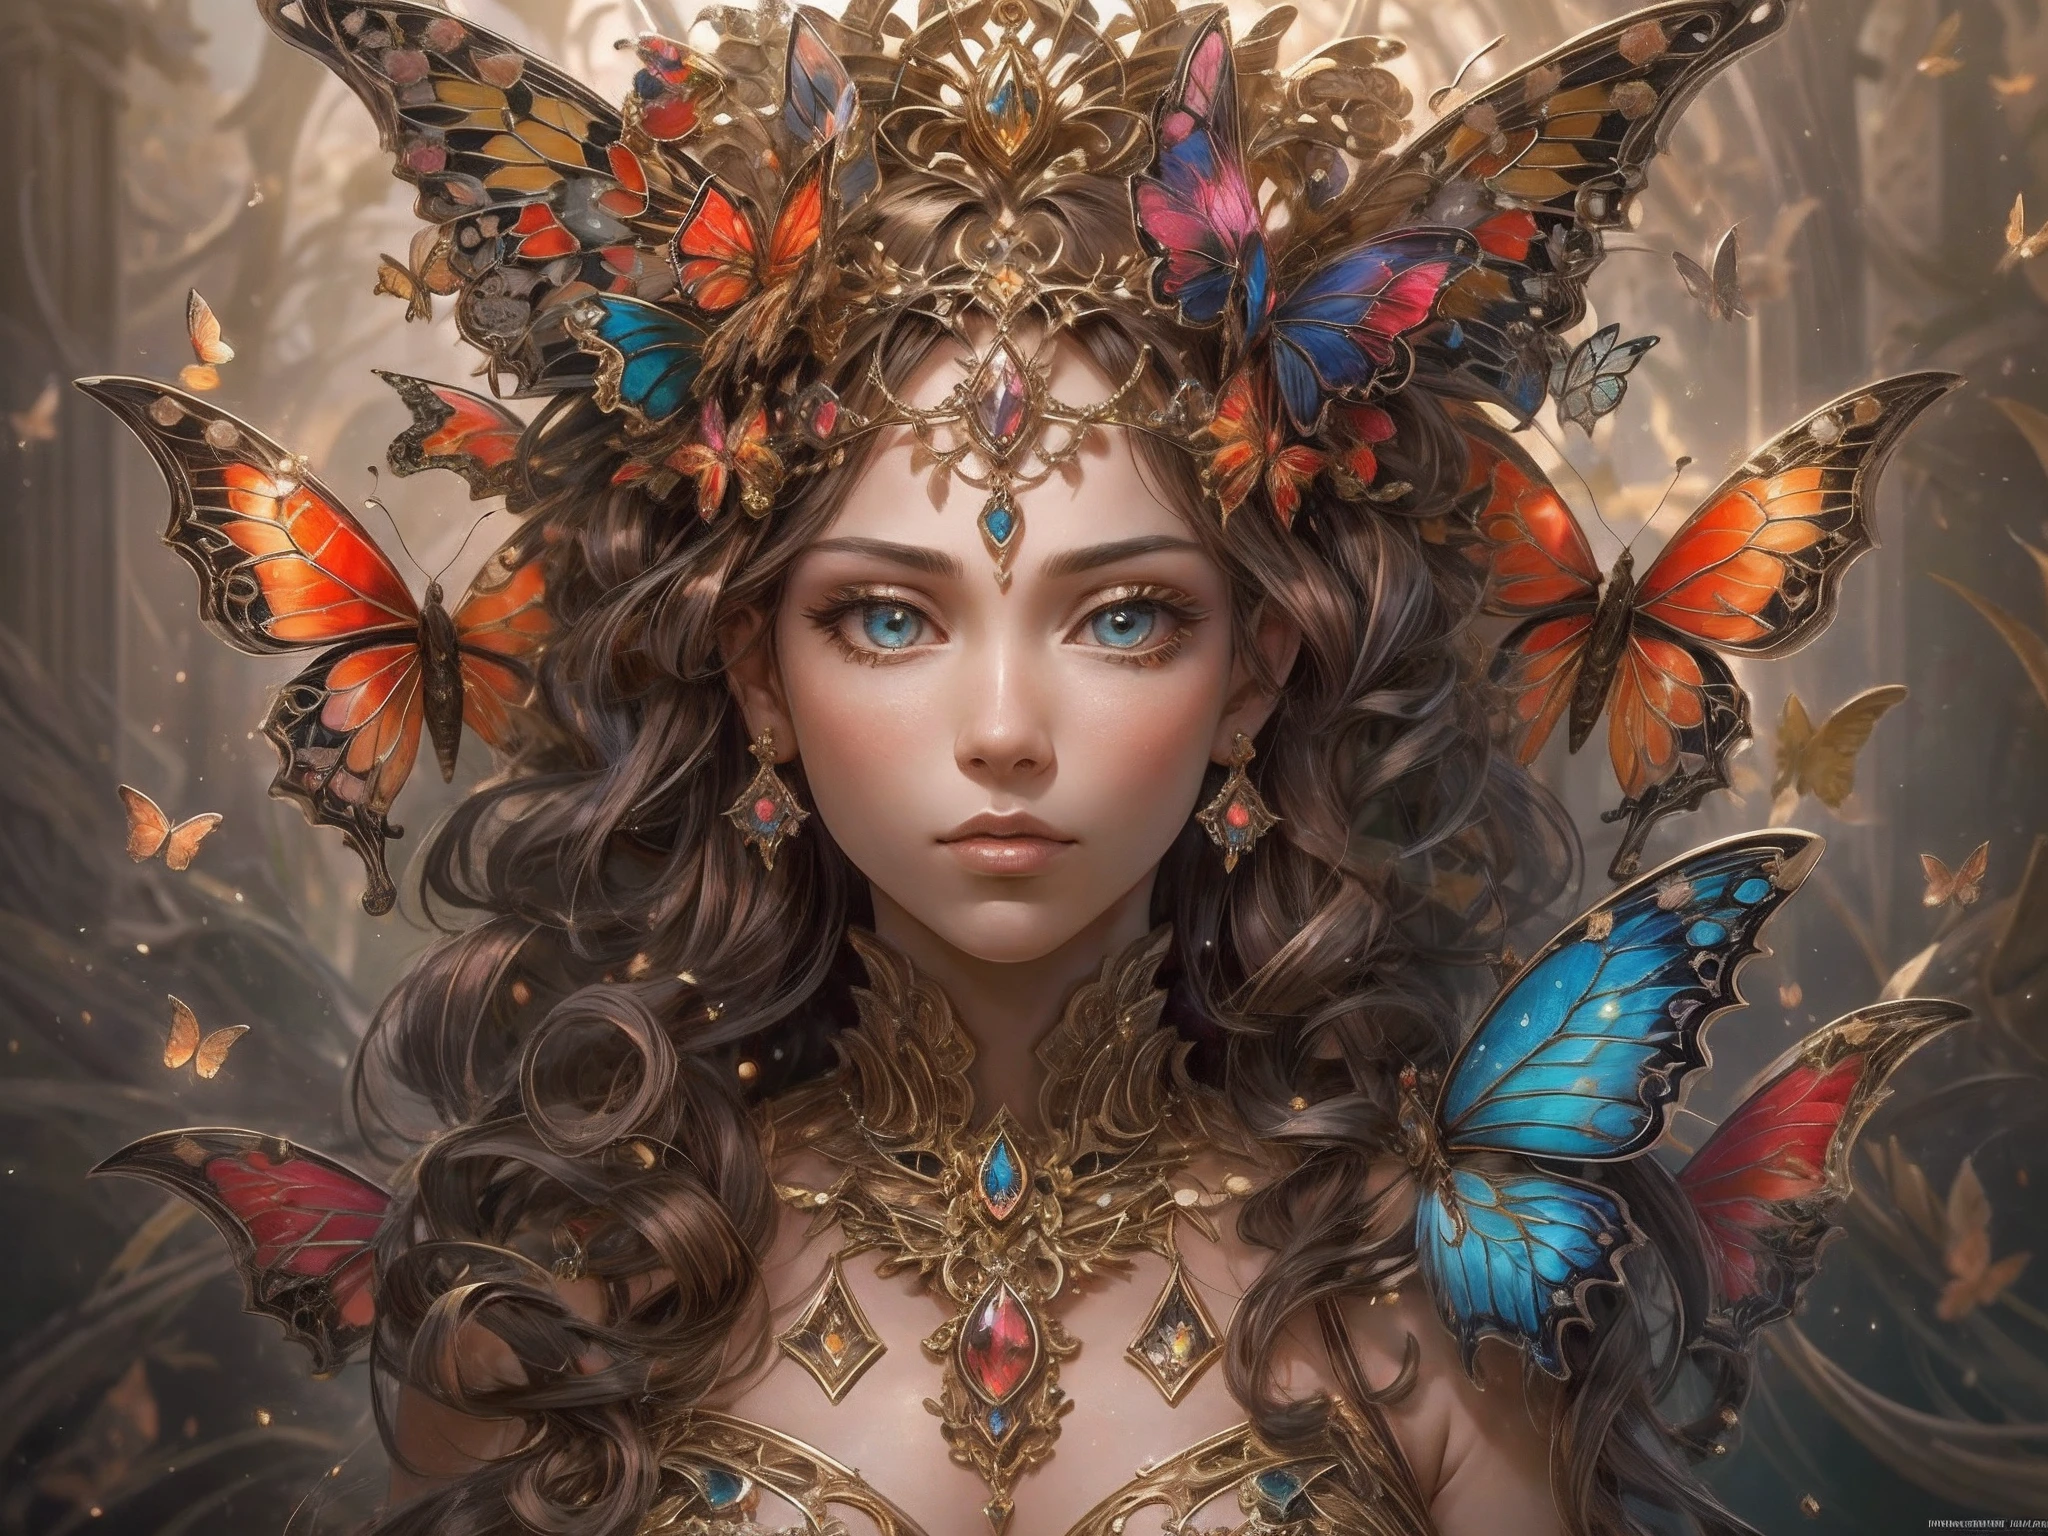 This is a highly detailed fantasy masterpiece featuring one woman with a stunning, intricately detailed crown with lots of gems and jewels. Generate a beautiful and elegant butterfly queen with a highly detailed and emotive face. Her eyes are high quality with many realistic details and realistic shading. Her skin is a creamy coffee hue, her shining hair is curly and shimmers with varying hues of red and brown, and her dress is luxurious with weightless gossamer, silk, and highly intricate detailing throughout the bodice. Include glow-in-the-dark flowers, lots of particles, highly realistic fantasy butterflies with translucent jewel-toned wings and fine detailing, and glow. The artwork is done in the style of Guviz and brings to mind masters in the genre such as trending fantasy works on Artstation and Midjourney. Camera: Utilize dynamic composition techniques to emphasize etherealness and delicate detail. Include dream colors.